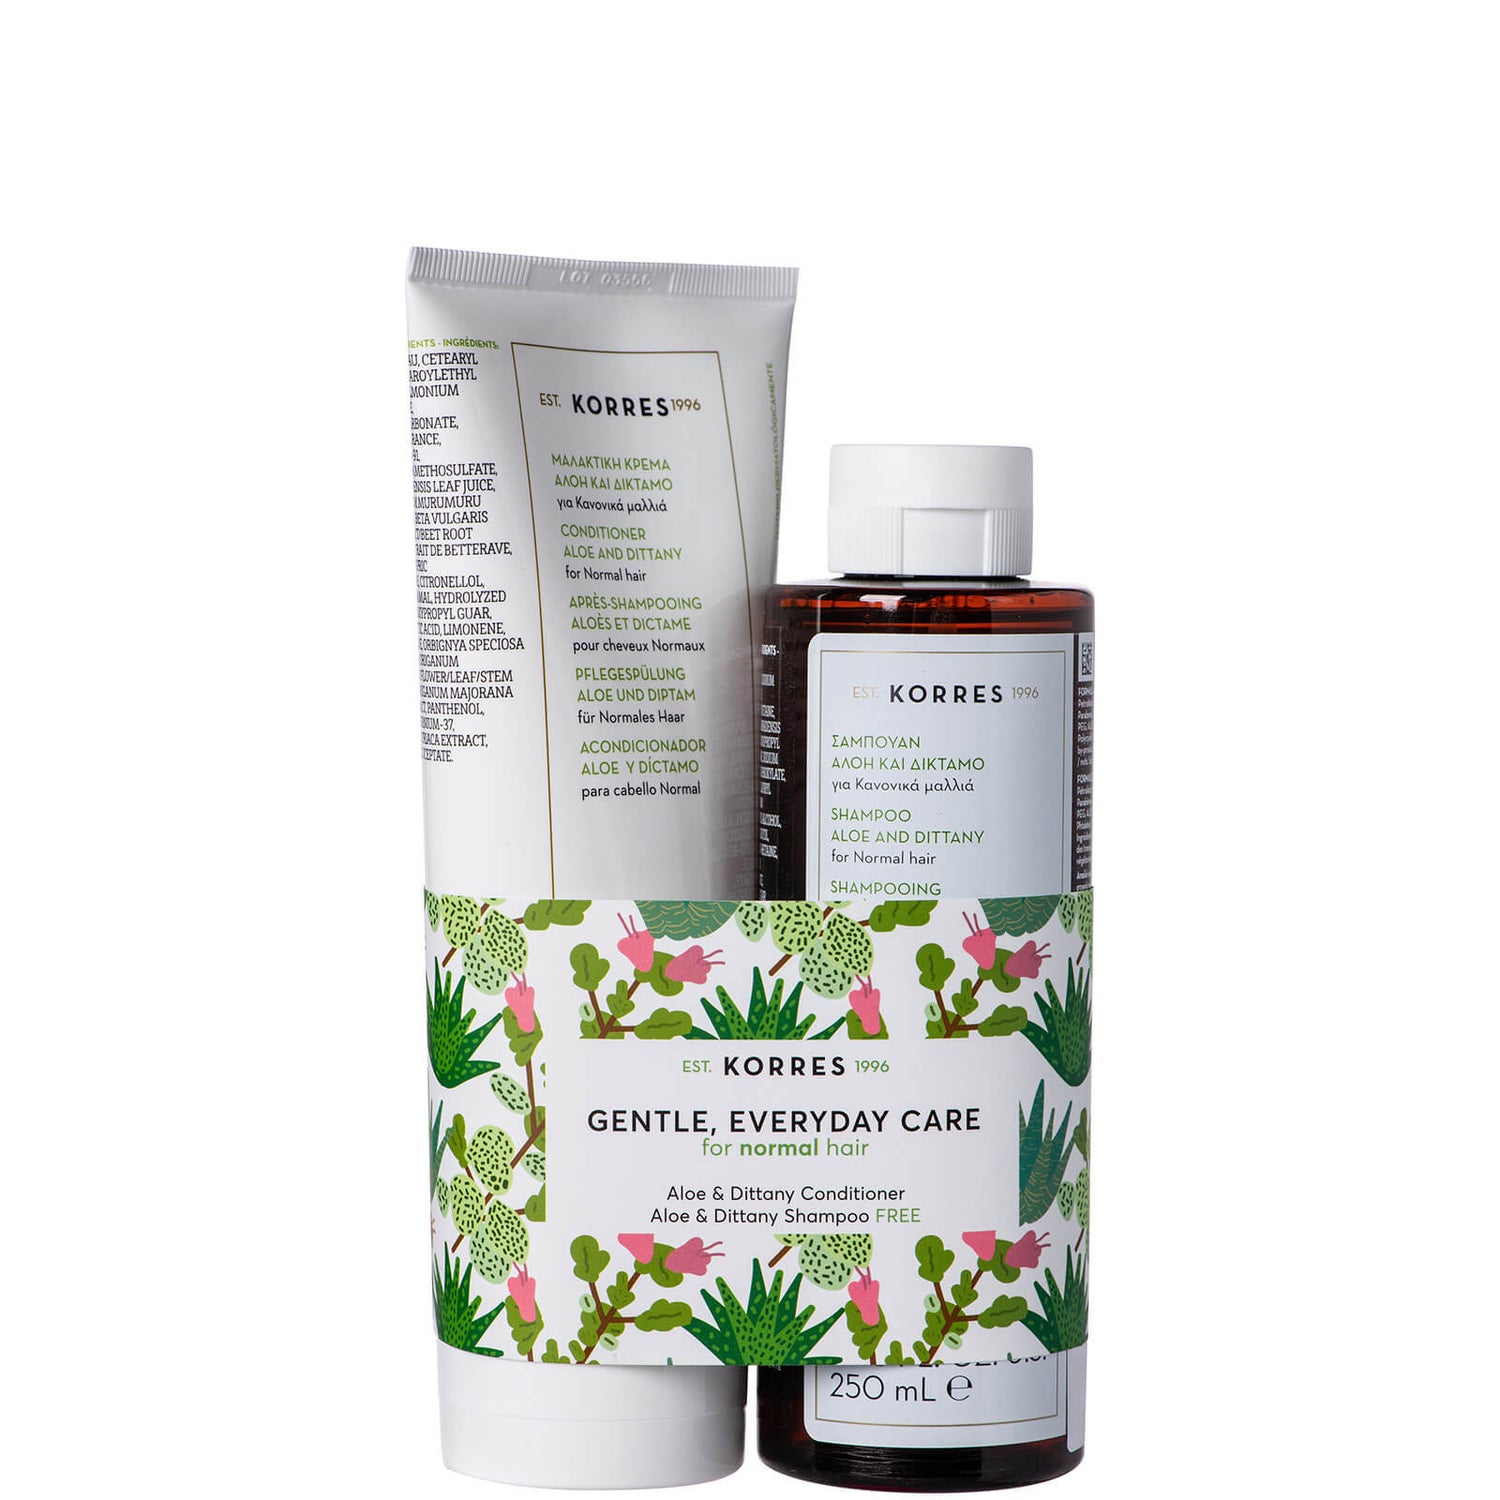 KORRES Aloe & Dittany Kit Conditioner and Shampoo Duo (Worth £31.00)